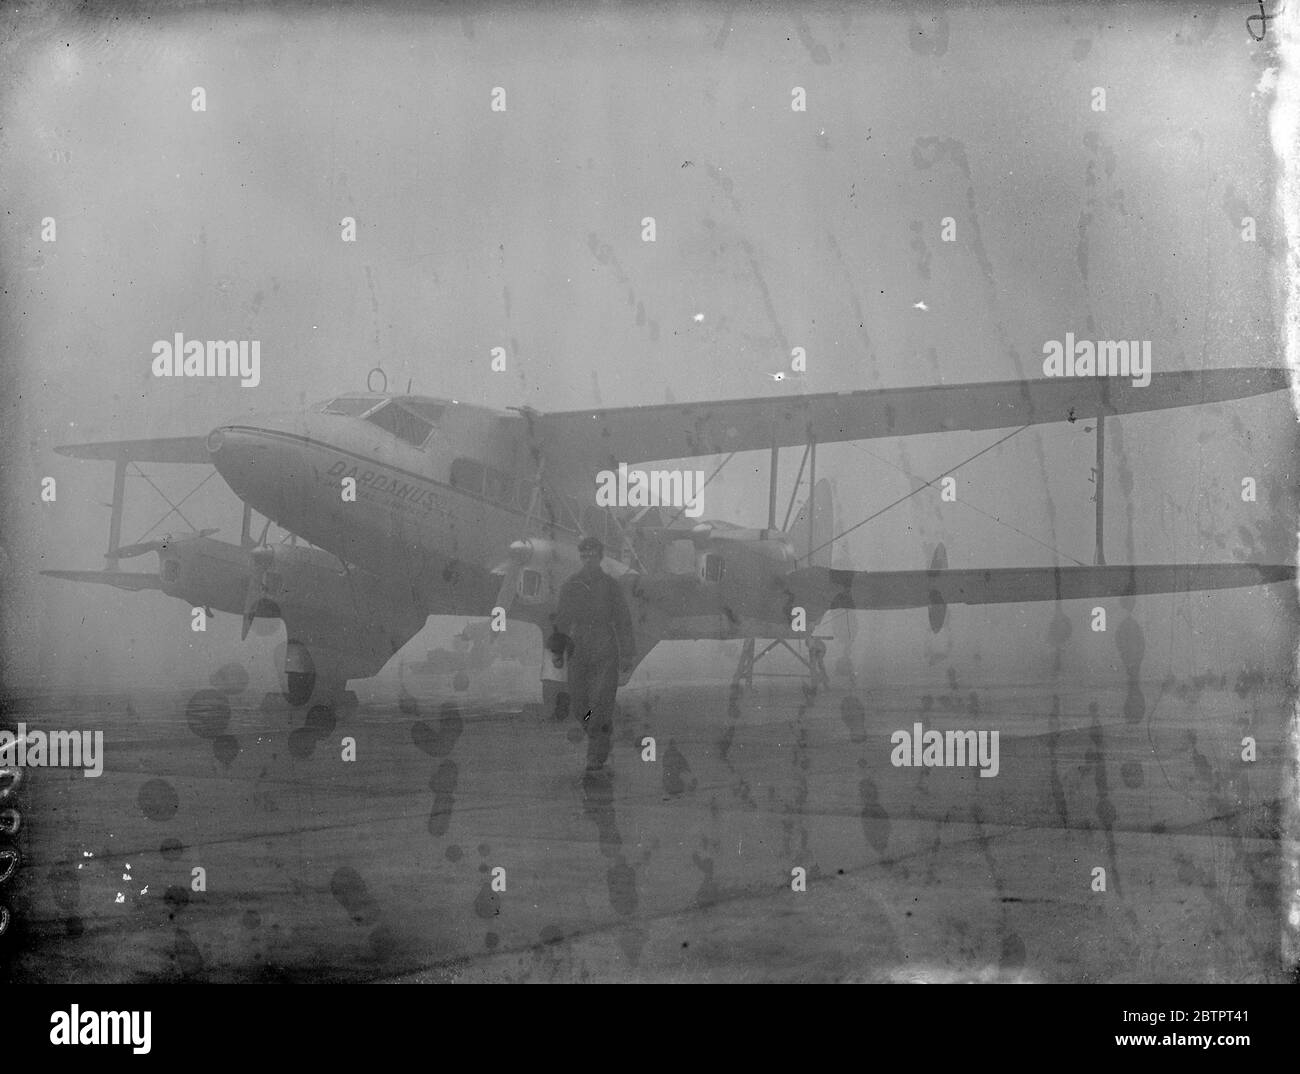 Aircraft grounded owing to fog. And imperials Airways liner De Havilland DH86A 'Dardanus' (G-ADUE) being taken into the hangar at Croydon through the fog which caused aircraft to be grounded and usual services suspended today (Tuesday). 2 November 1937 Stock Photo